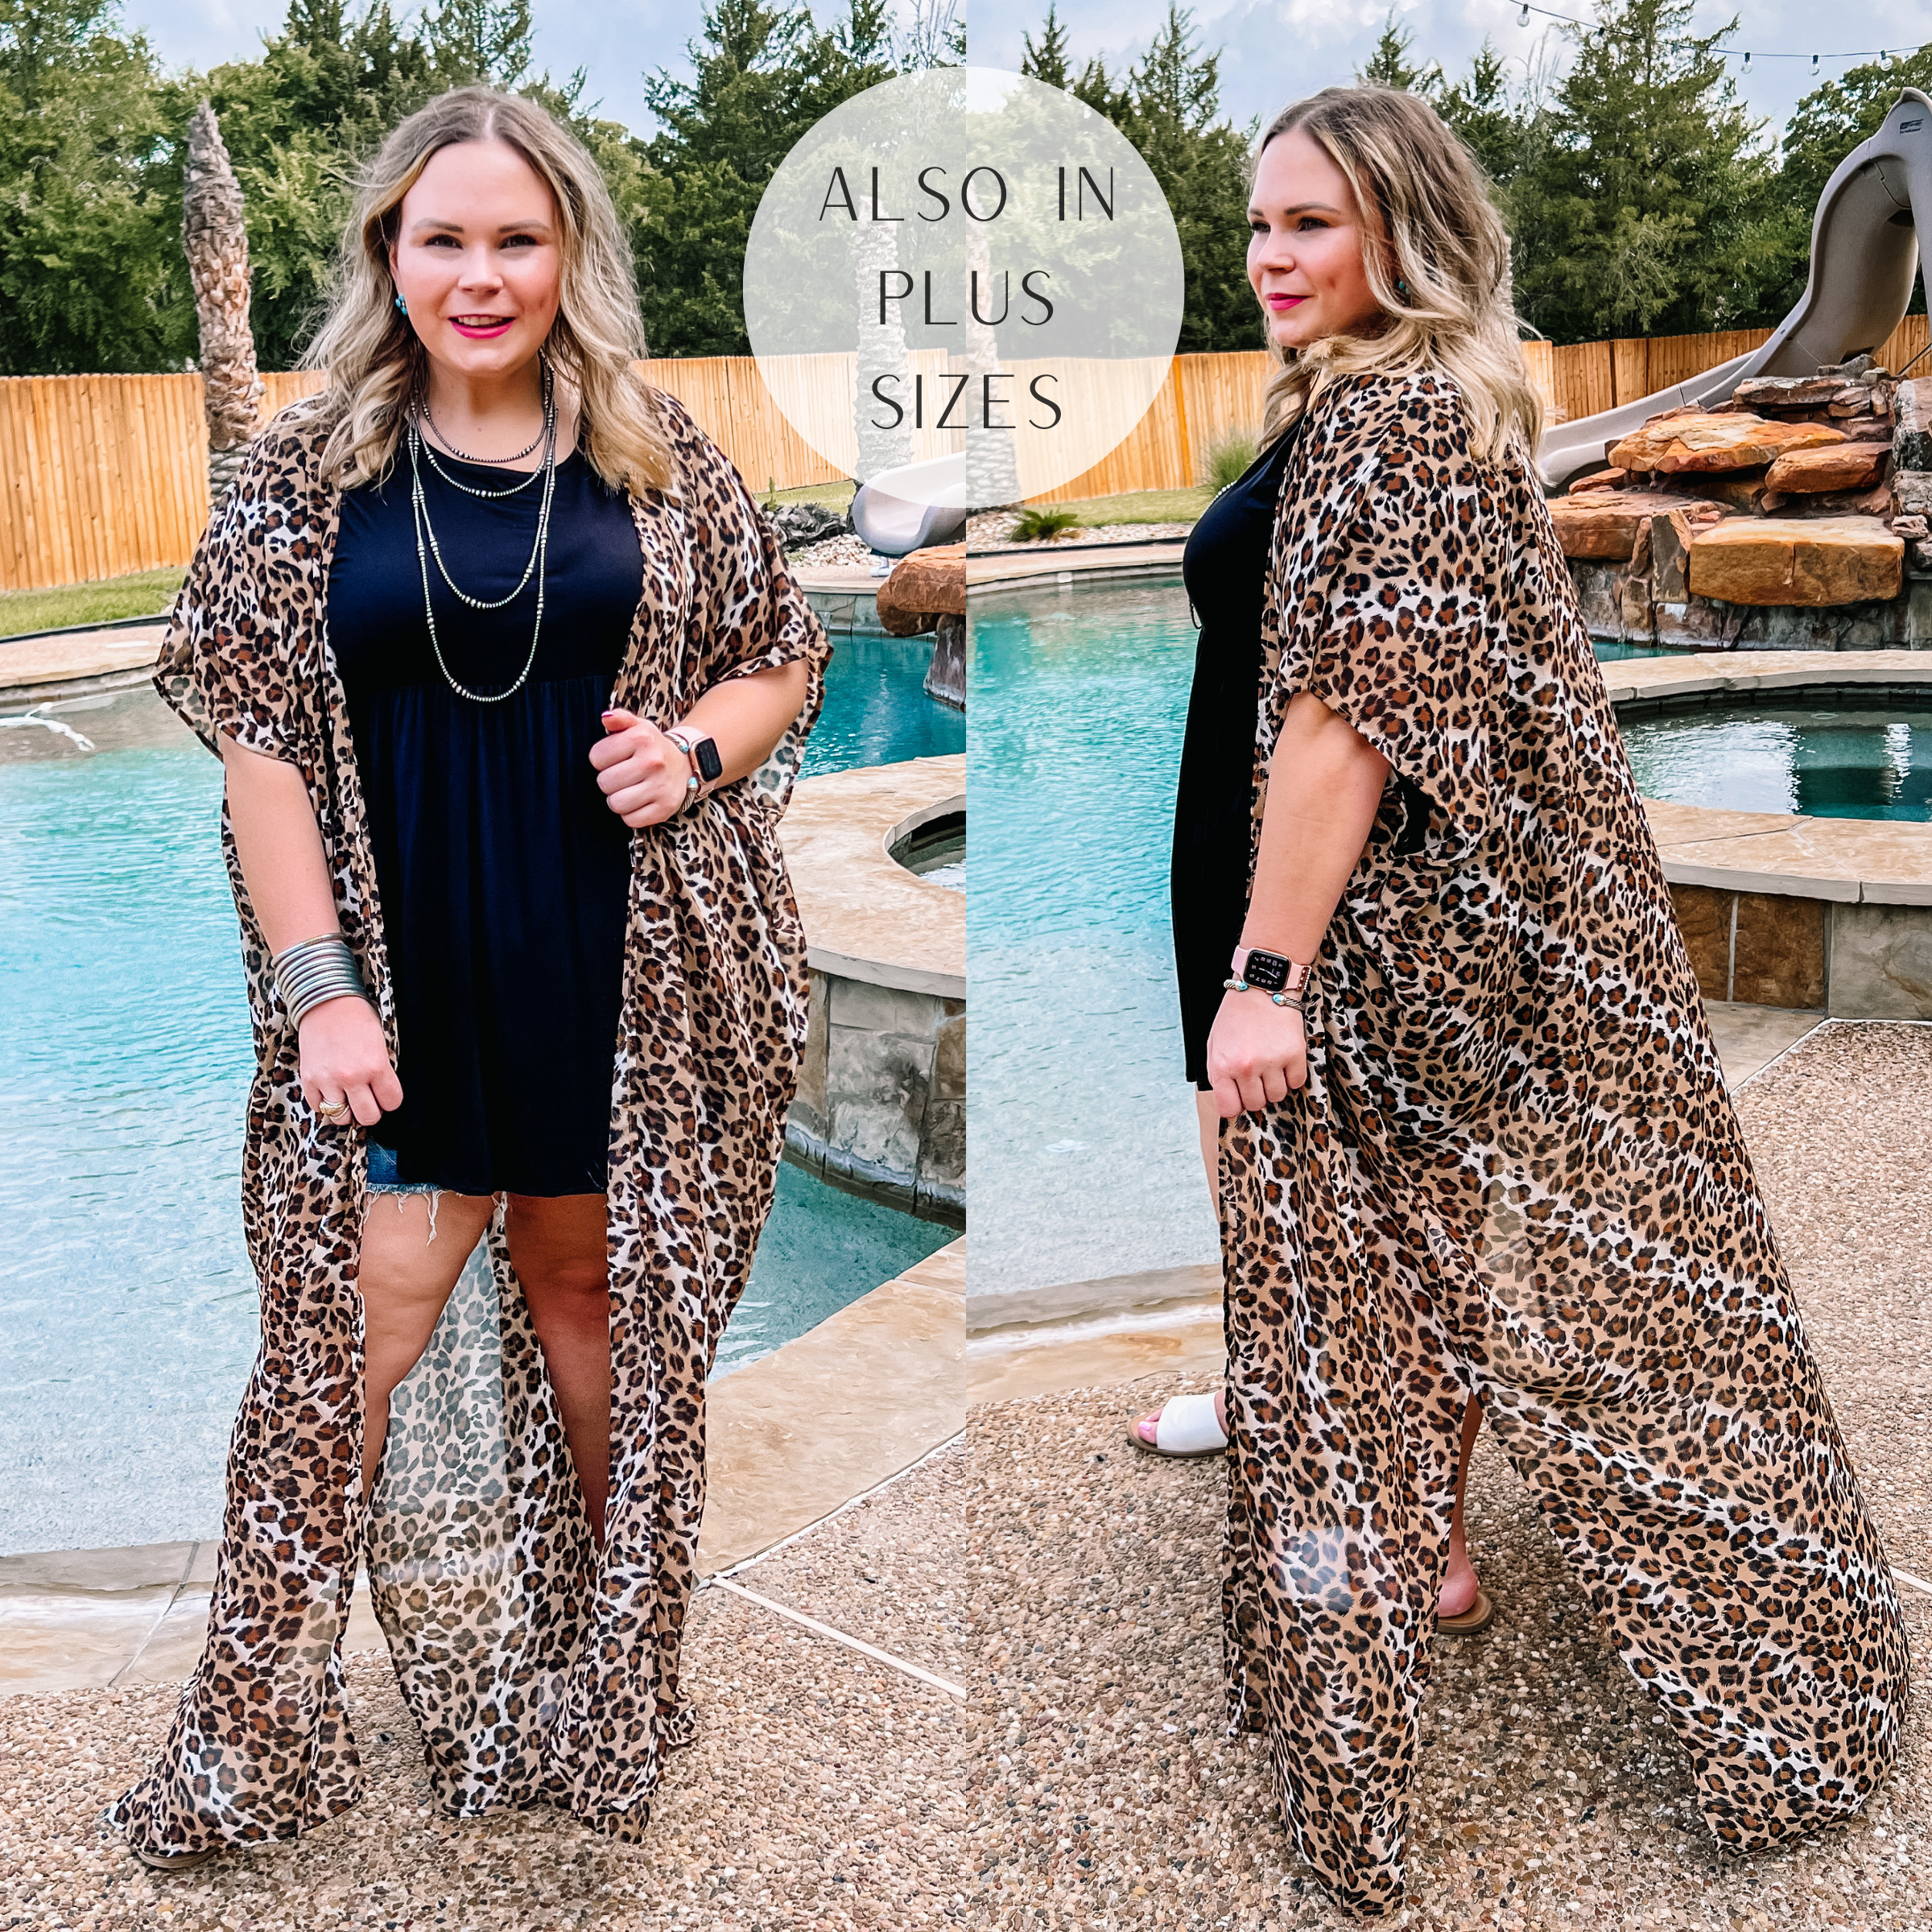 Model is wearing a long leopard print kimono that has short sleeves. Model has it on over a solid black top, denim shorts, white sandals, and silver jewelry.